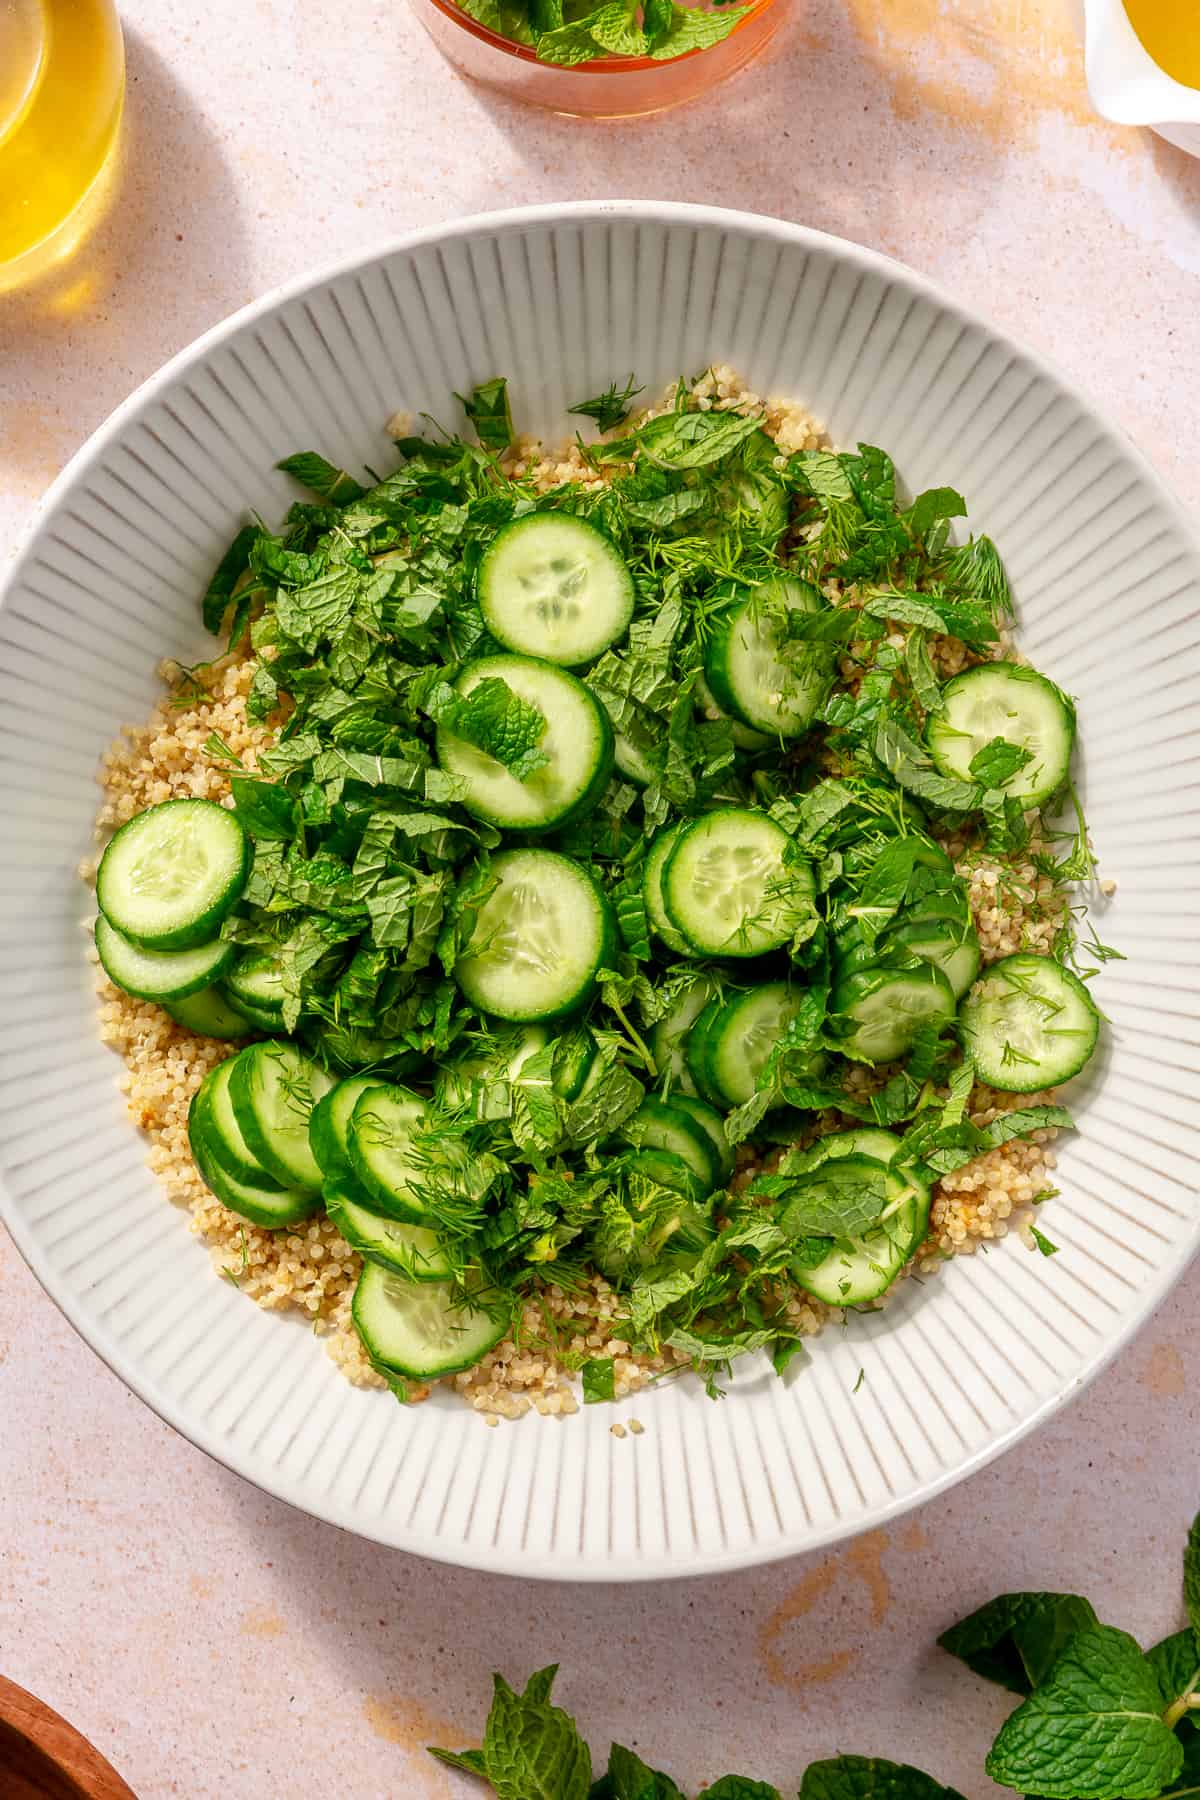 Cooked quinoa topped with herbs and cucumbers. Not combined.